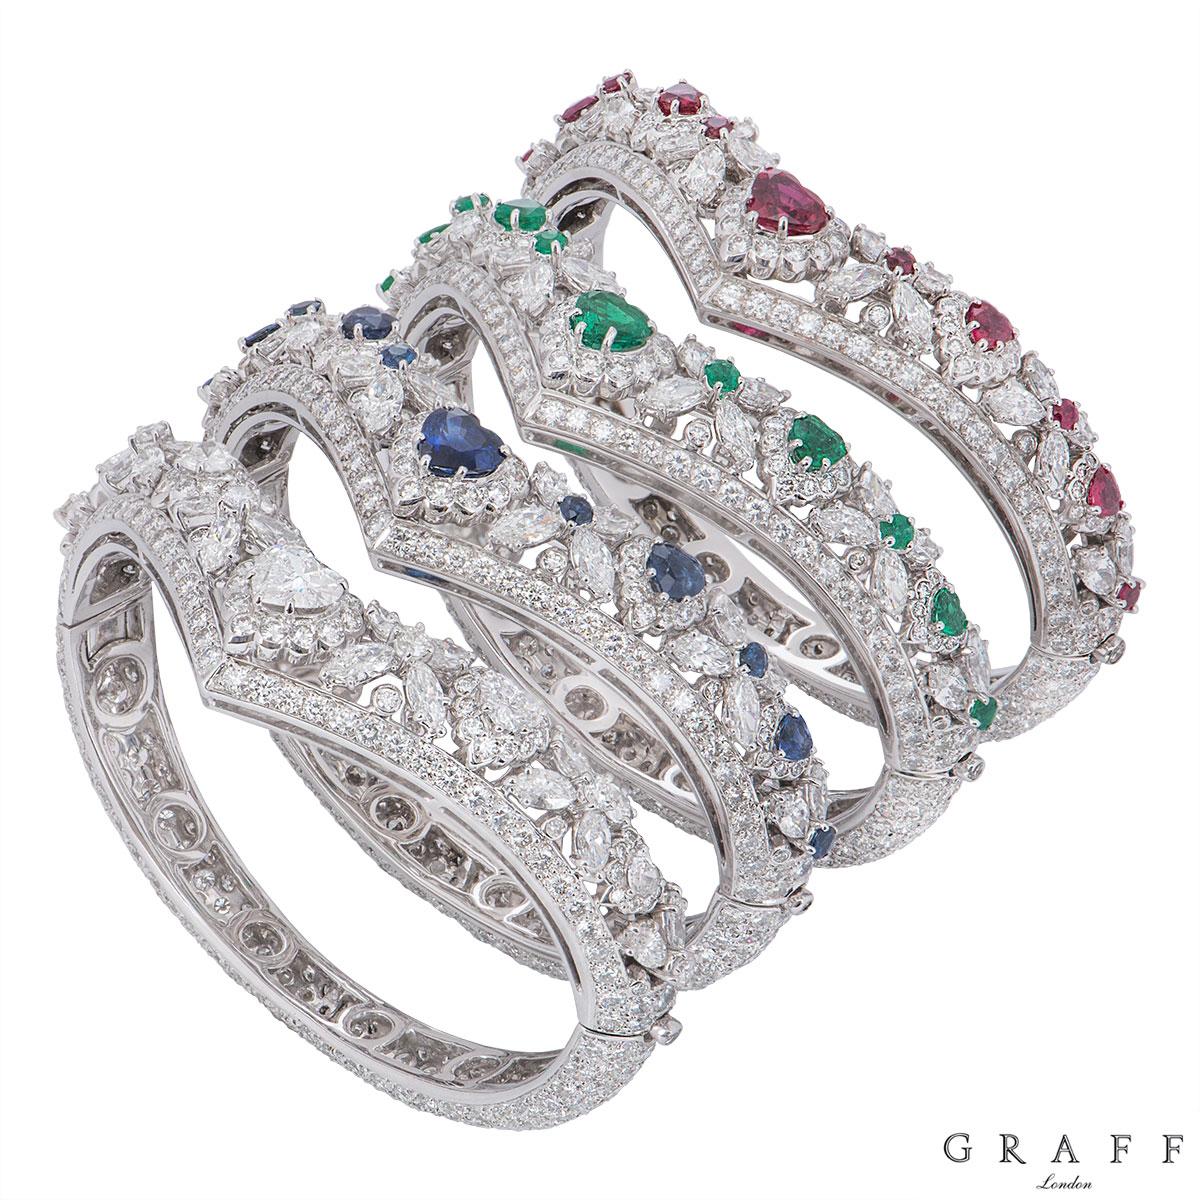 A truly unique and striking set of 4 diamond and gem set bangles in 18k white gold by Graff.

The first bangle - 18k white gold set with diamonds and rubies to the front v shape motif. The bangle features 5 heart cut rubies, separated by marquise